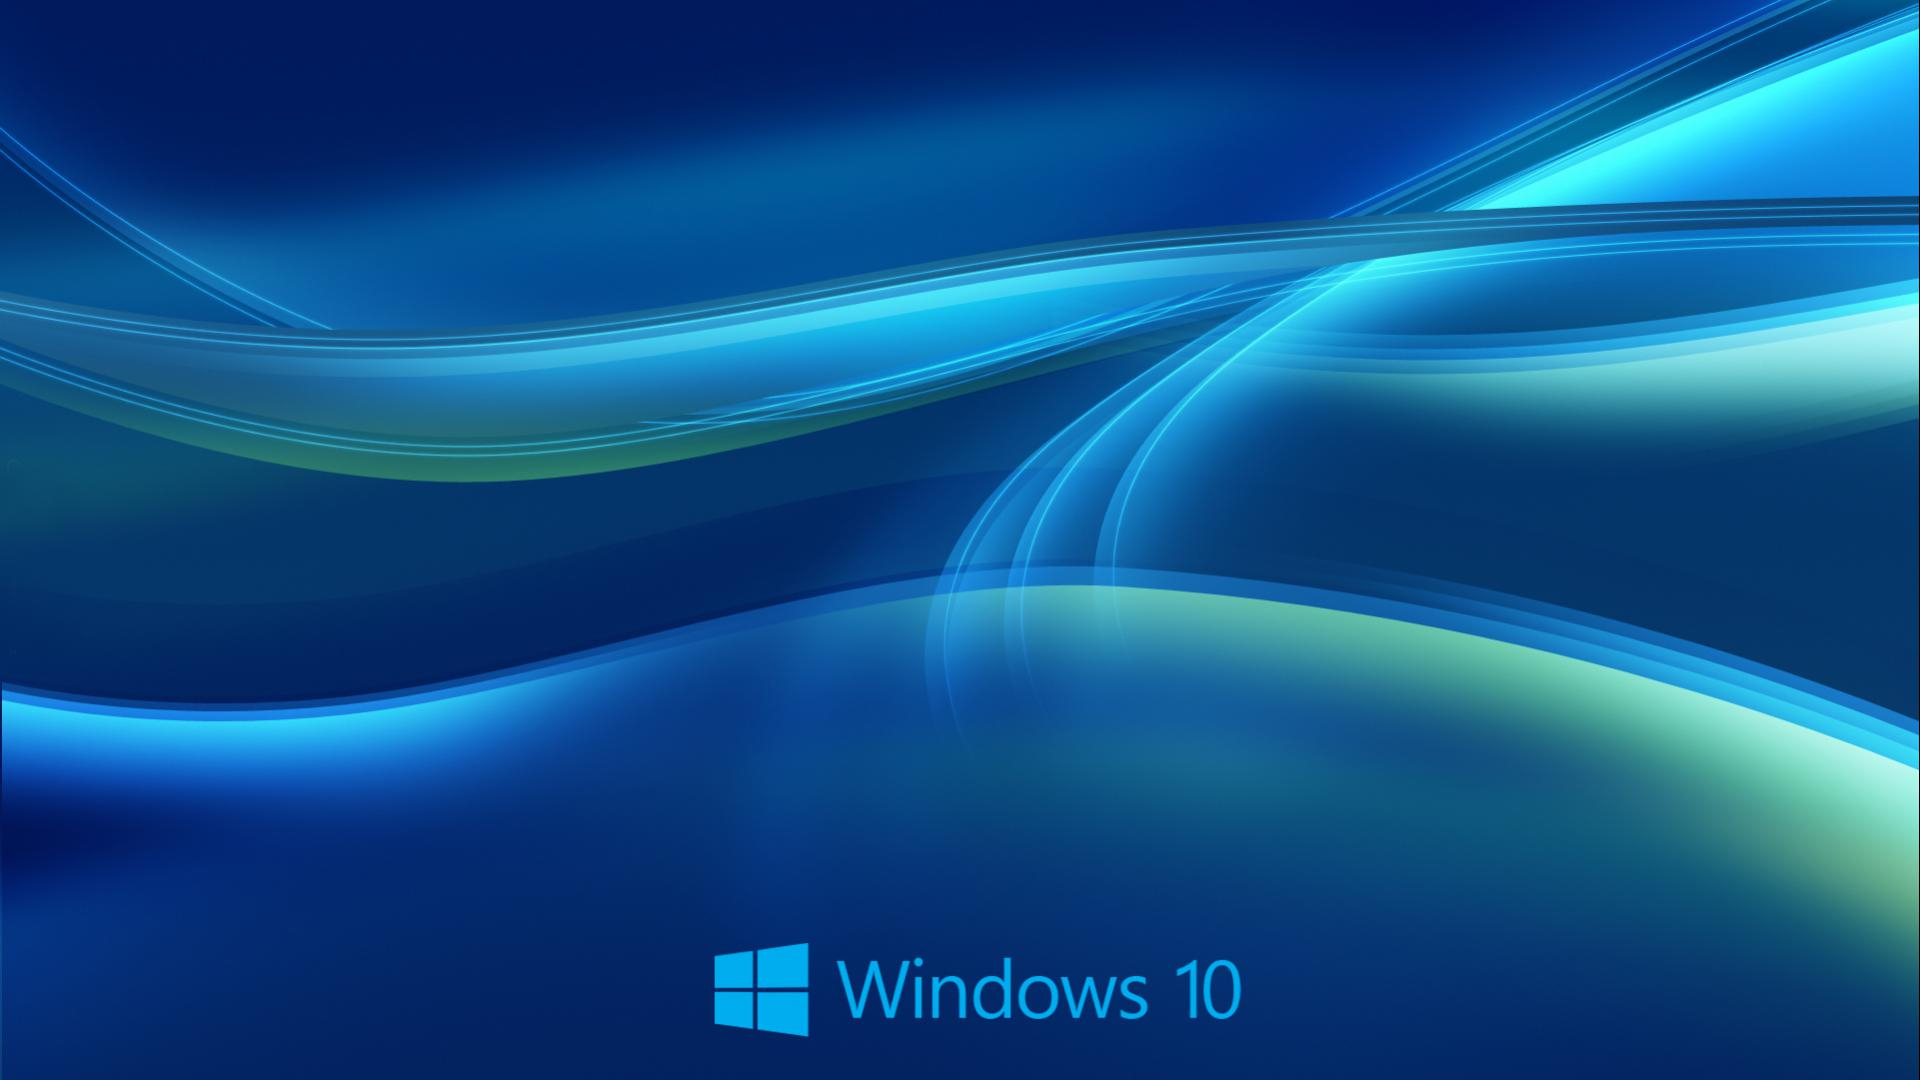 1920x1080 Free download Windows 10 Wallpaper HD in Blue Abstract with New Logo HD Wallpapers [] for your Desktop, Mobile \u0026 Tablet | Explore 48+ Windows Free Wallpaper for 1366x768 | Windows